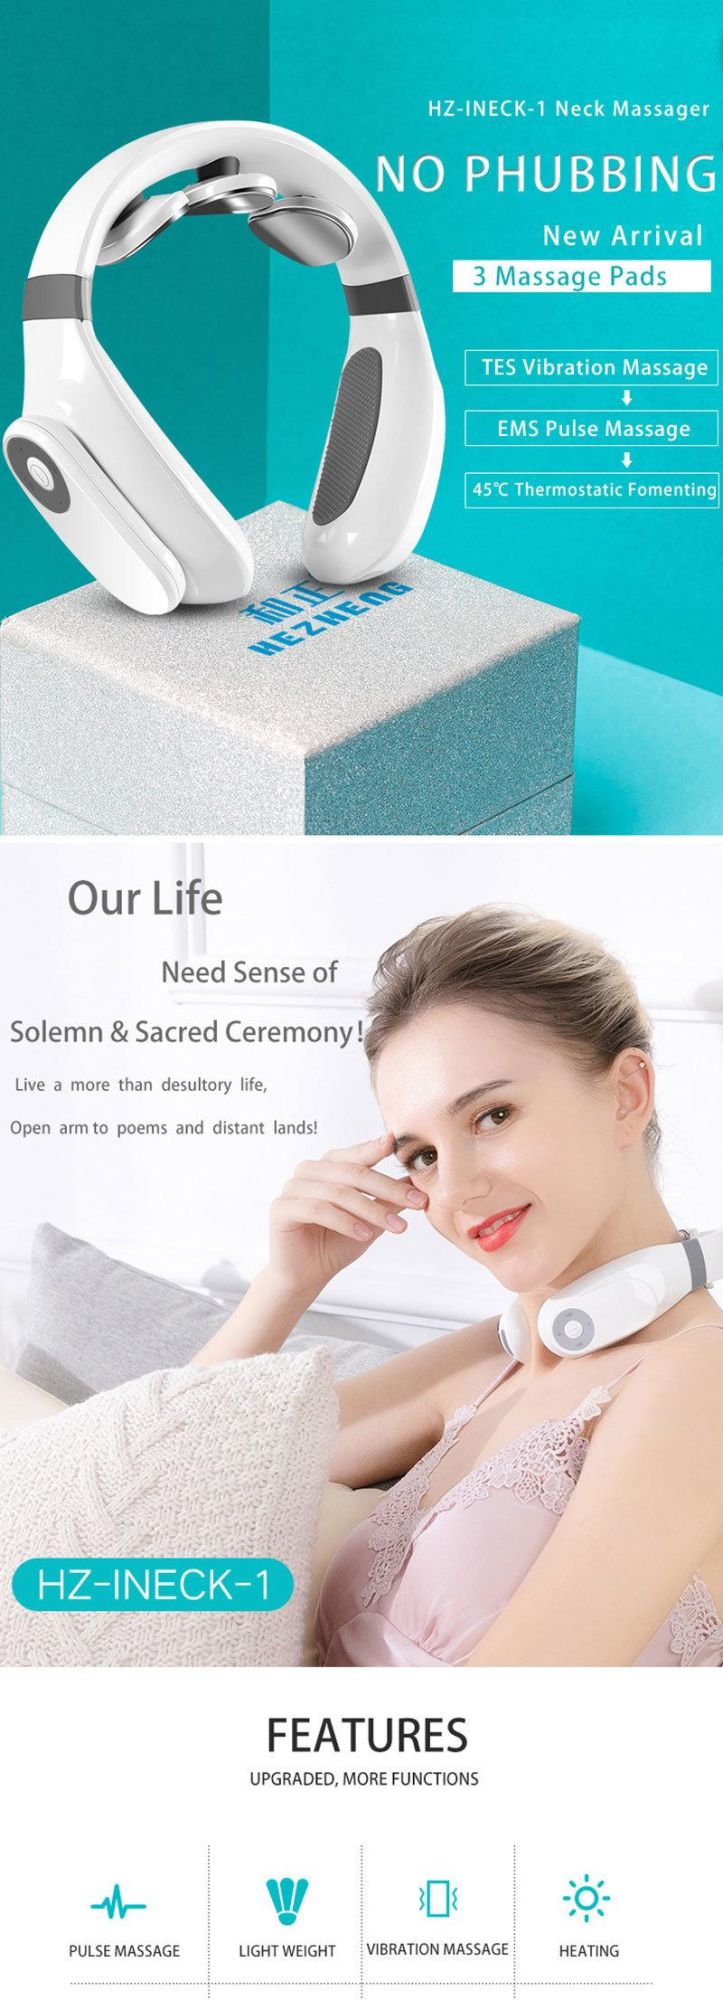 Cervical Vertebra Pain Relief Health Care Relaxation Deep Tissue Home Massage Products Tool Intelligent Neck Massager